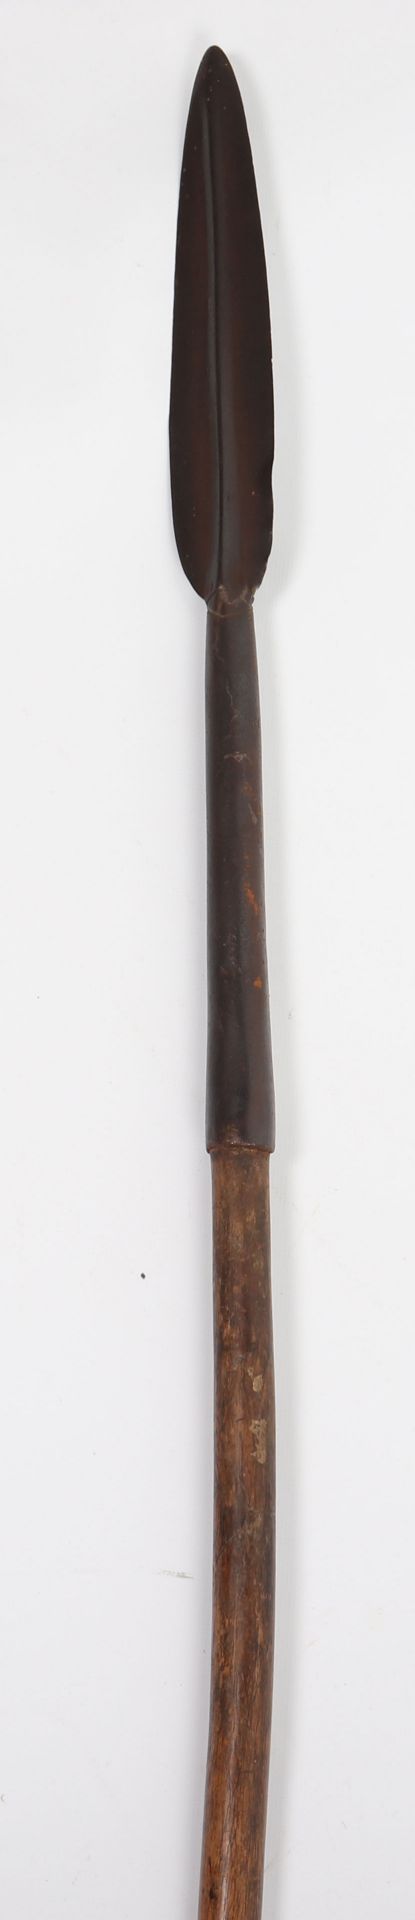 Almost Matched Pair of Sudanese Spears c.1880 - Image 3 of 18